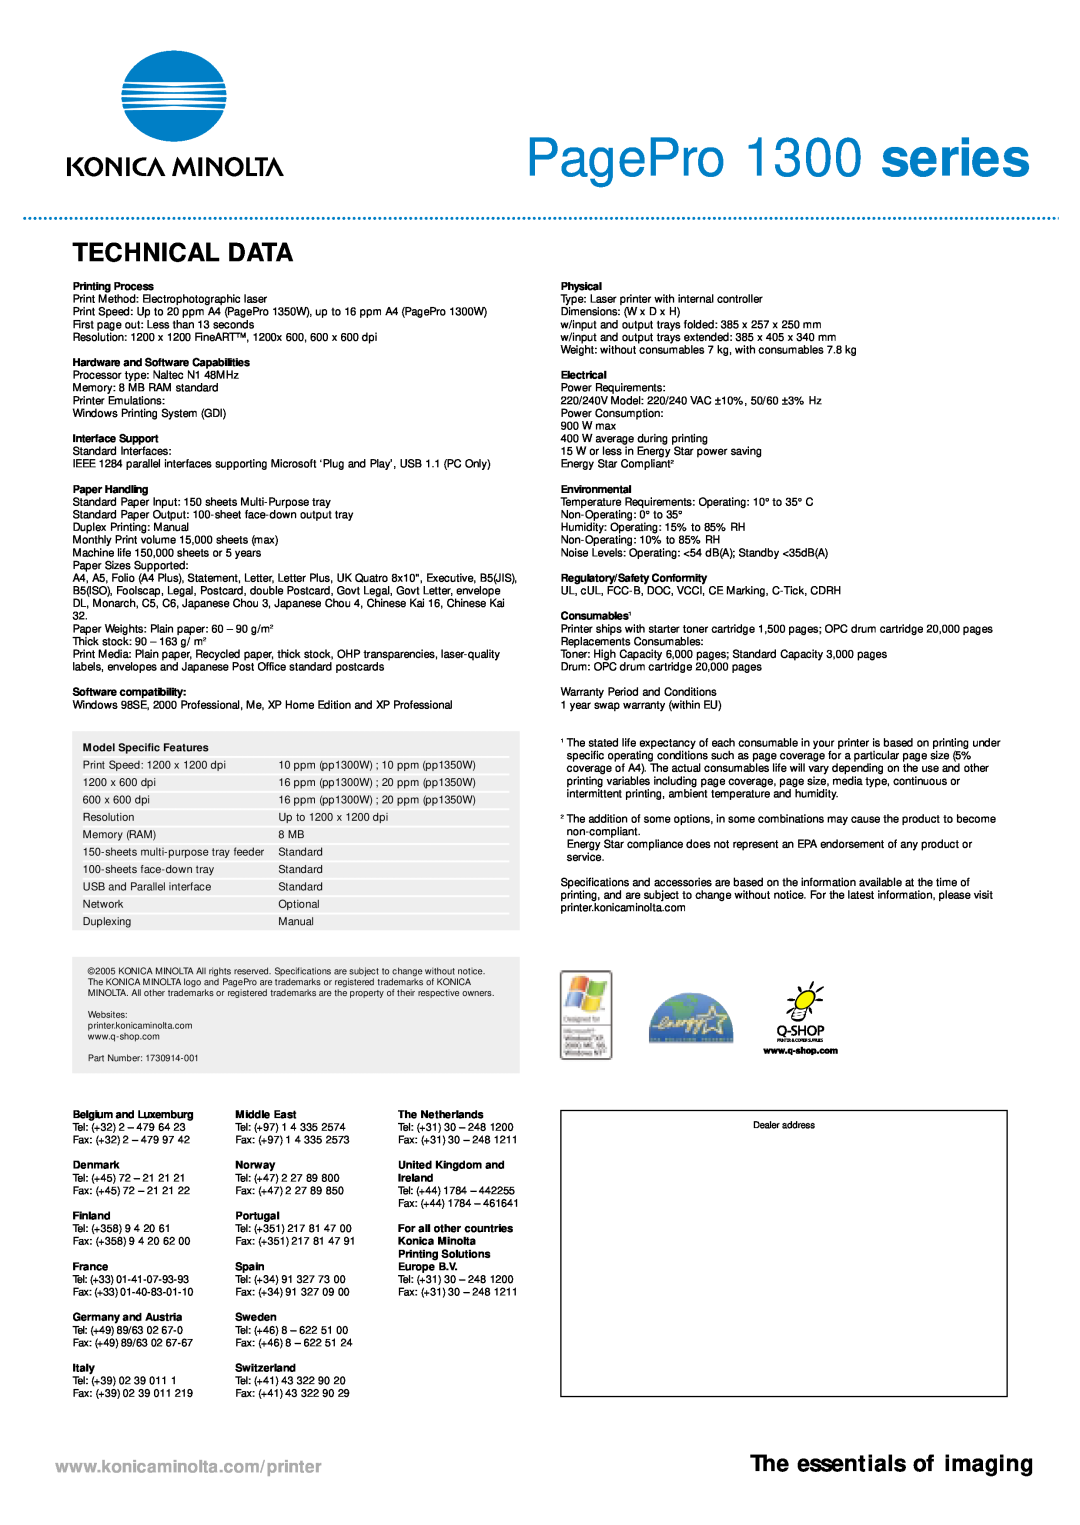 Konica Minolta 1300 Series manual PagePro 1300 series, Technical Data, The essentials of imaging 